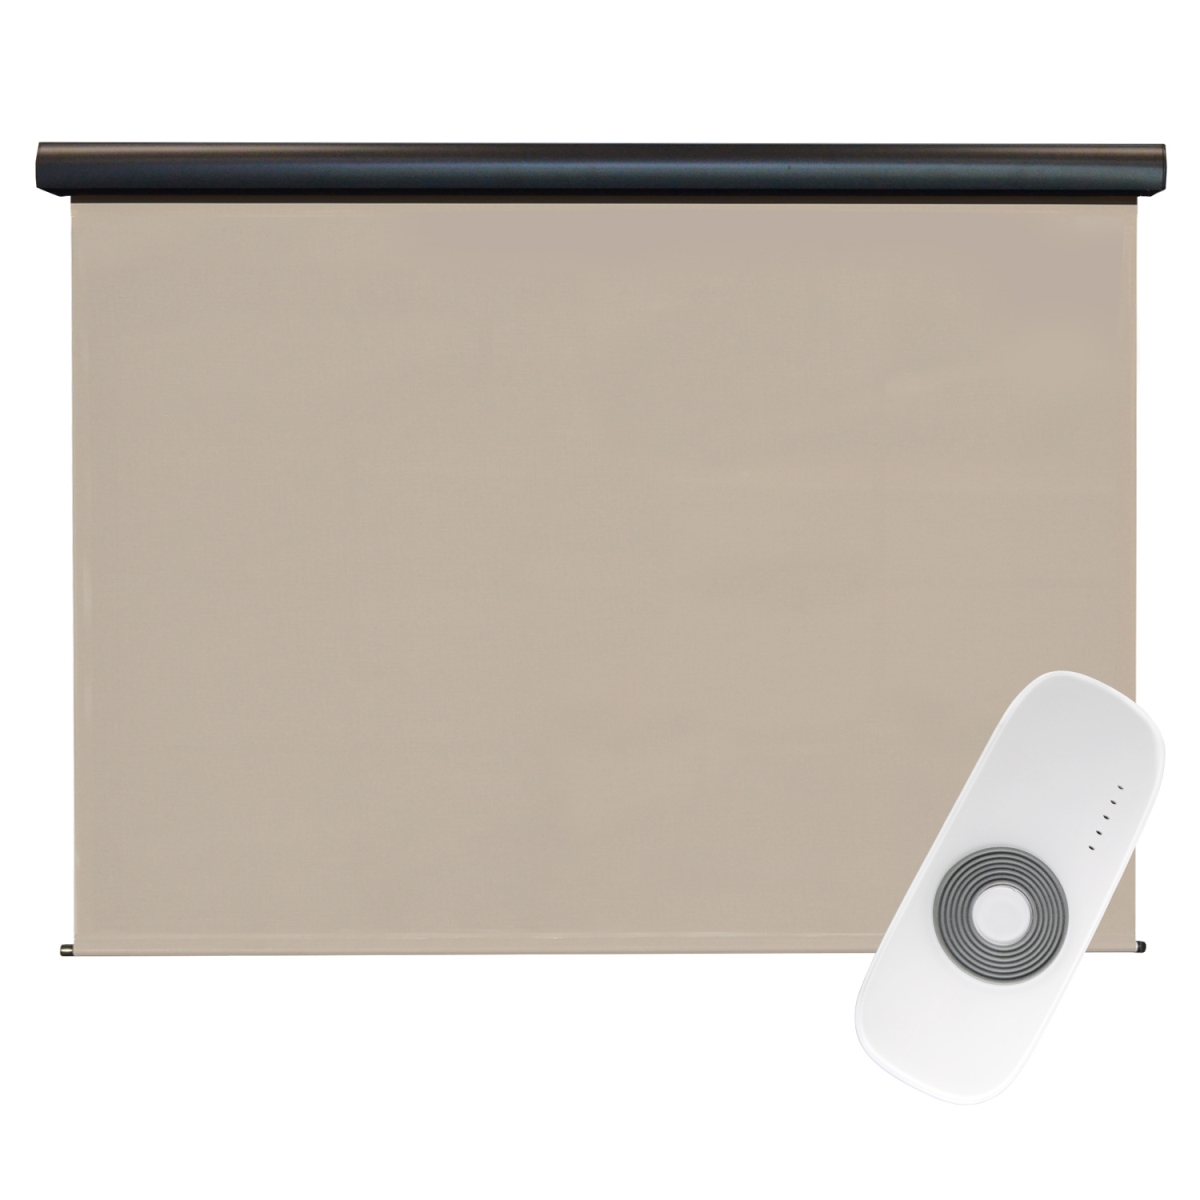 O80.108.80 10 X 8 Ft. Regal Rechargeable Motorized Outdoor Sun Shade With Protective Valance - Maple White